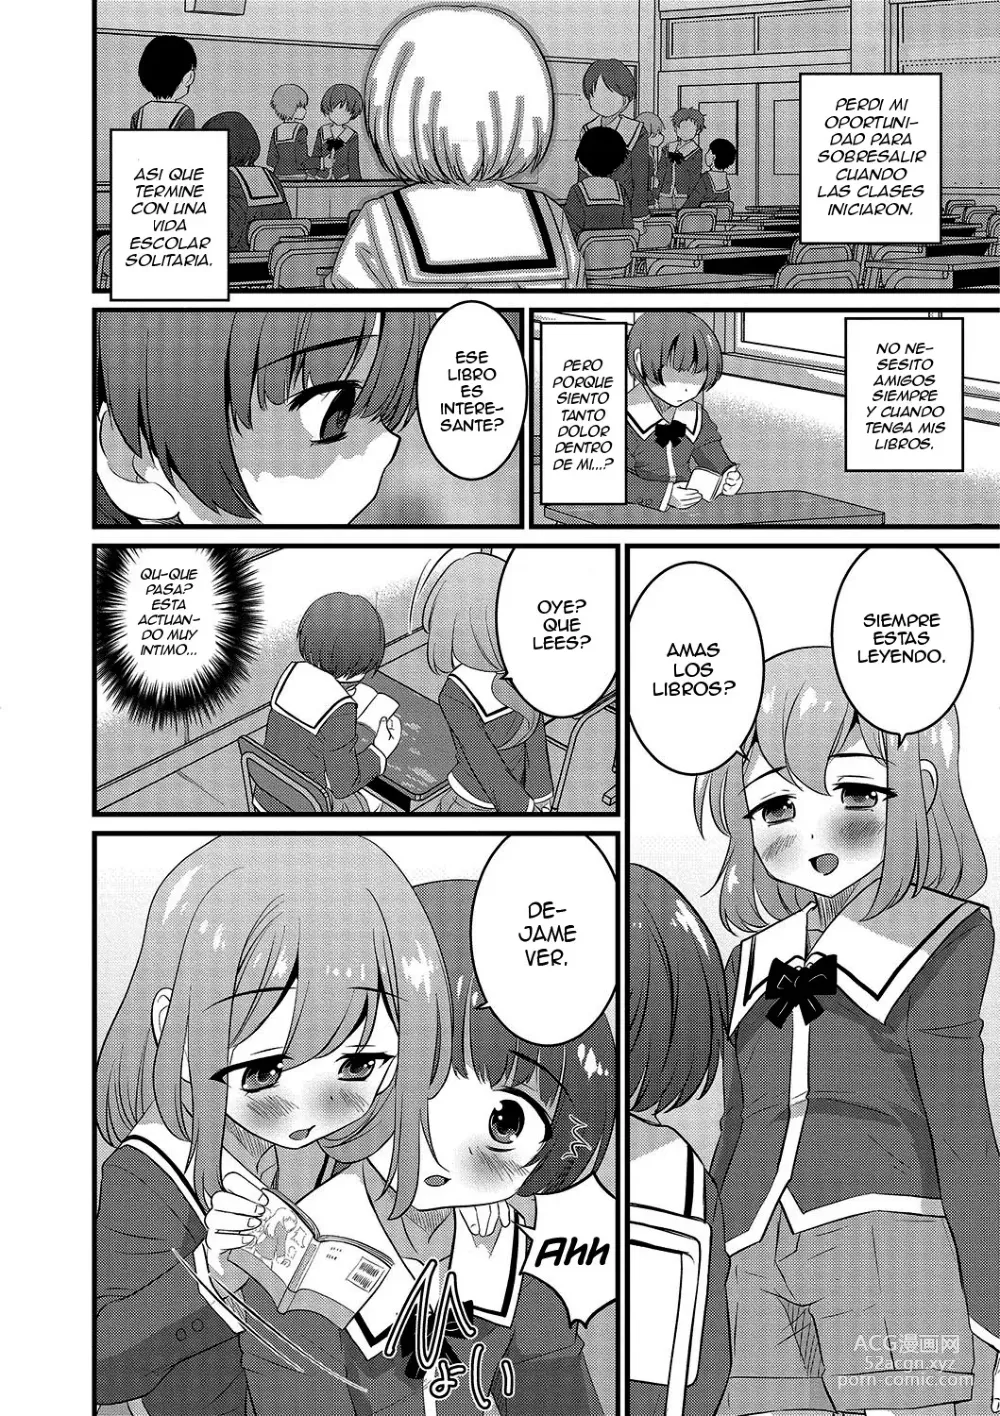 Page 2 of manga The Things I Don't Know.